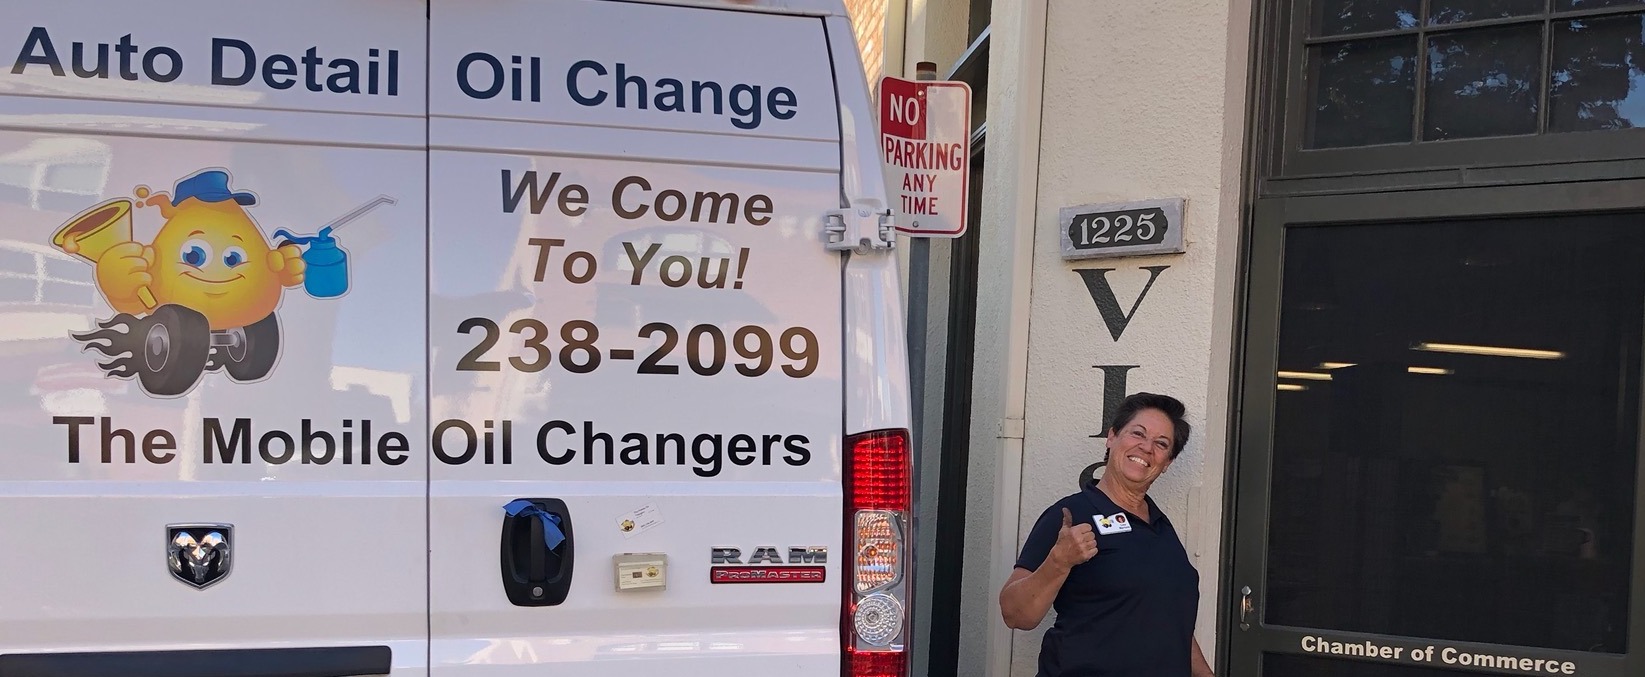 Lisa Marrone of the mobile oil changers